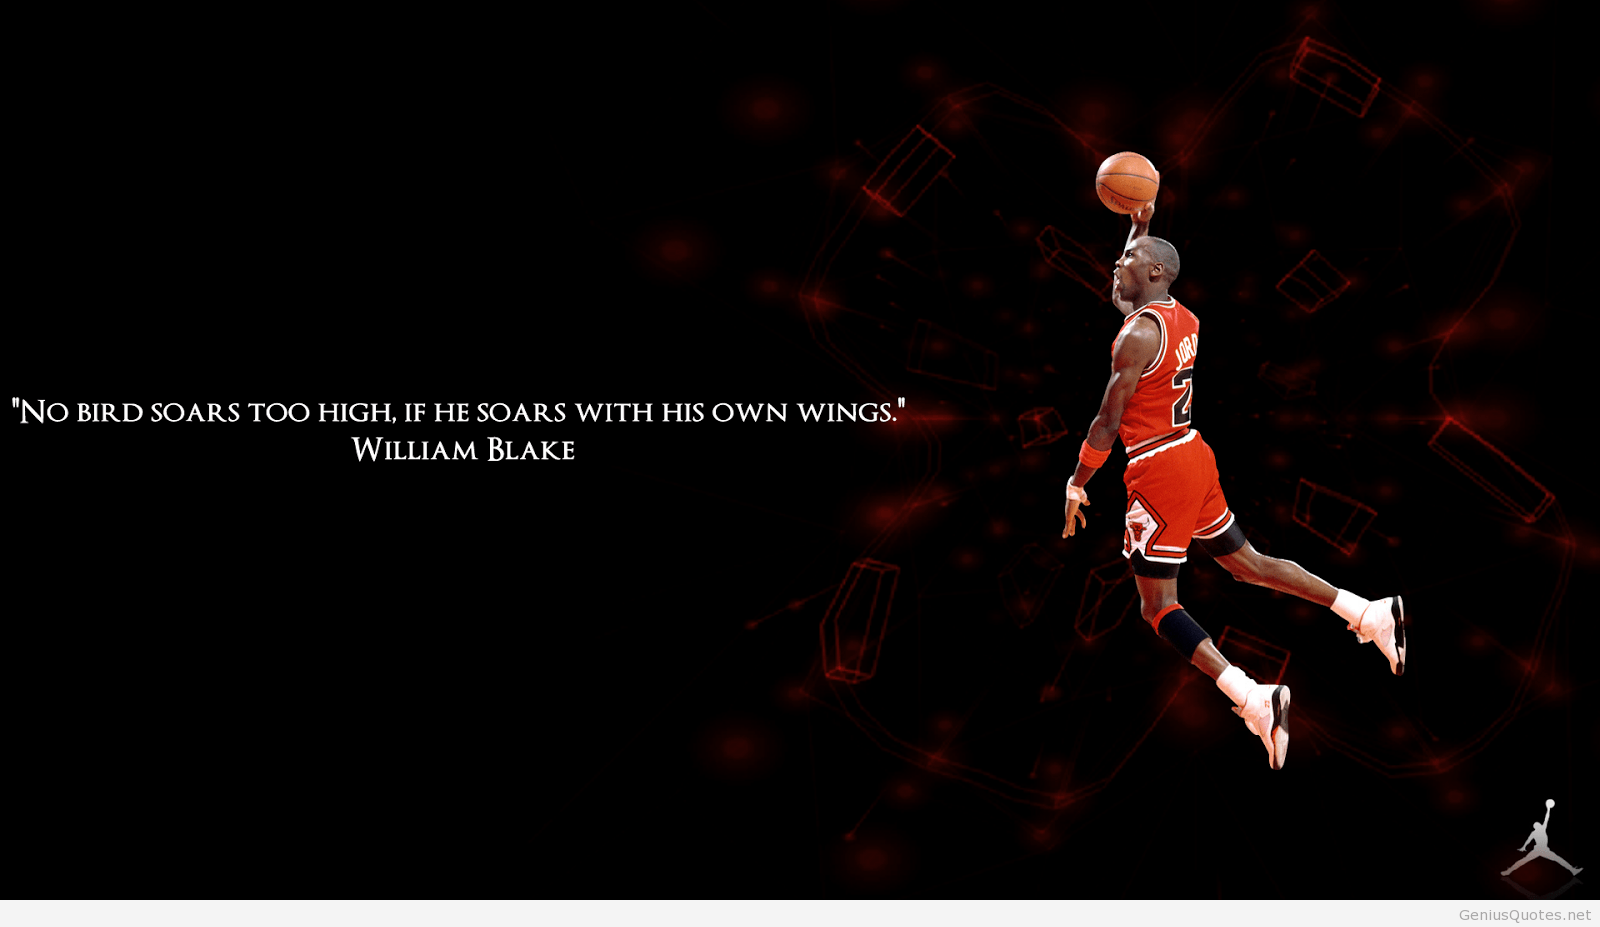 Sports Quotes Wallpapers - Wallpaper Cave